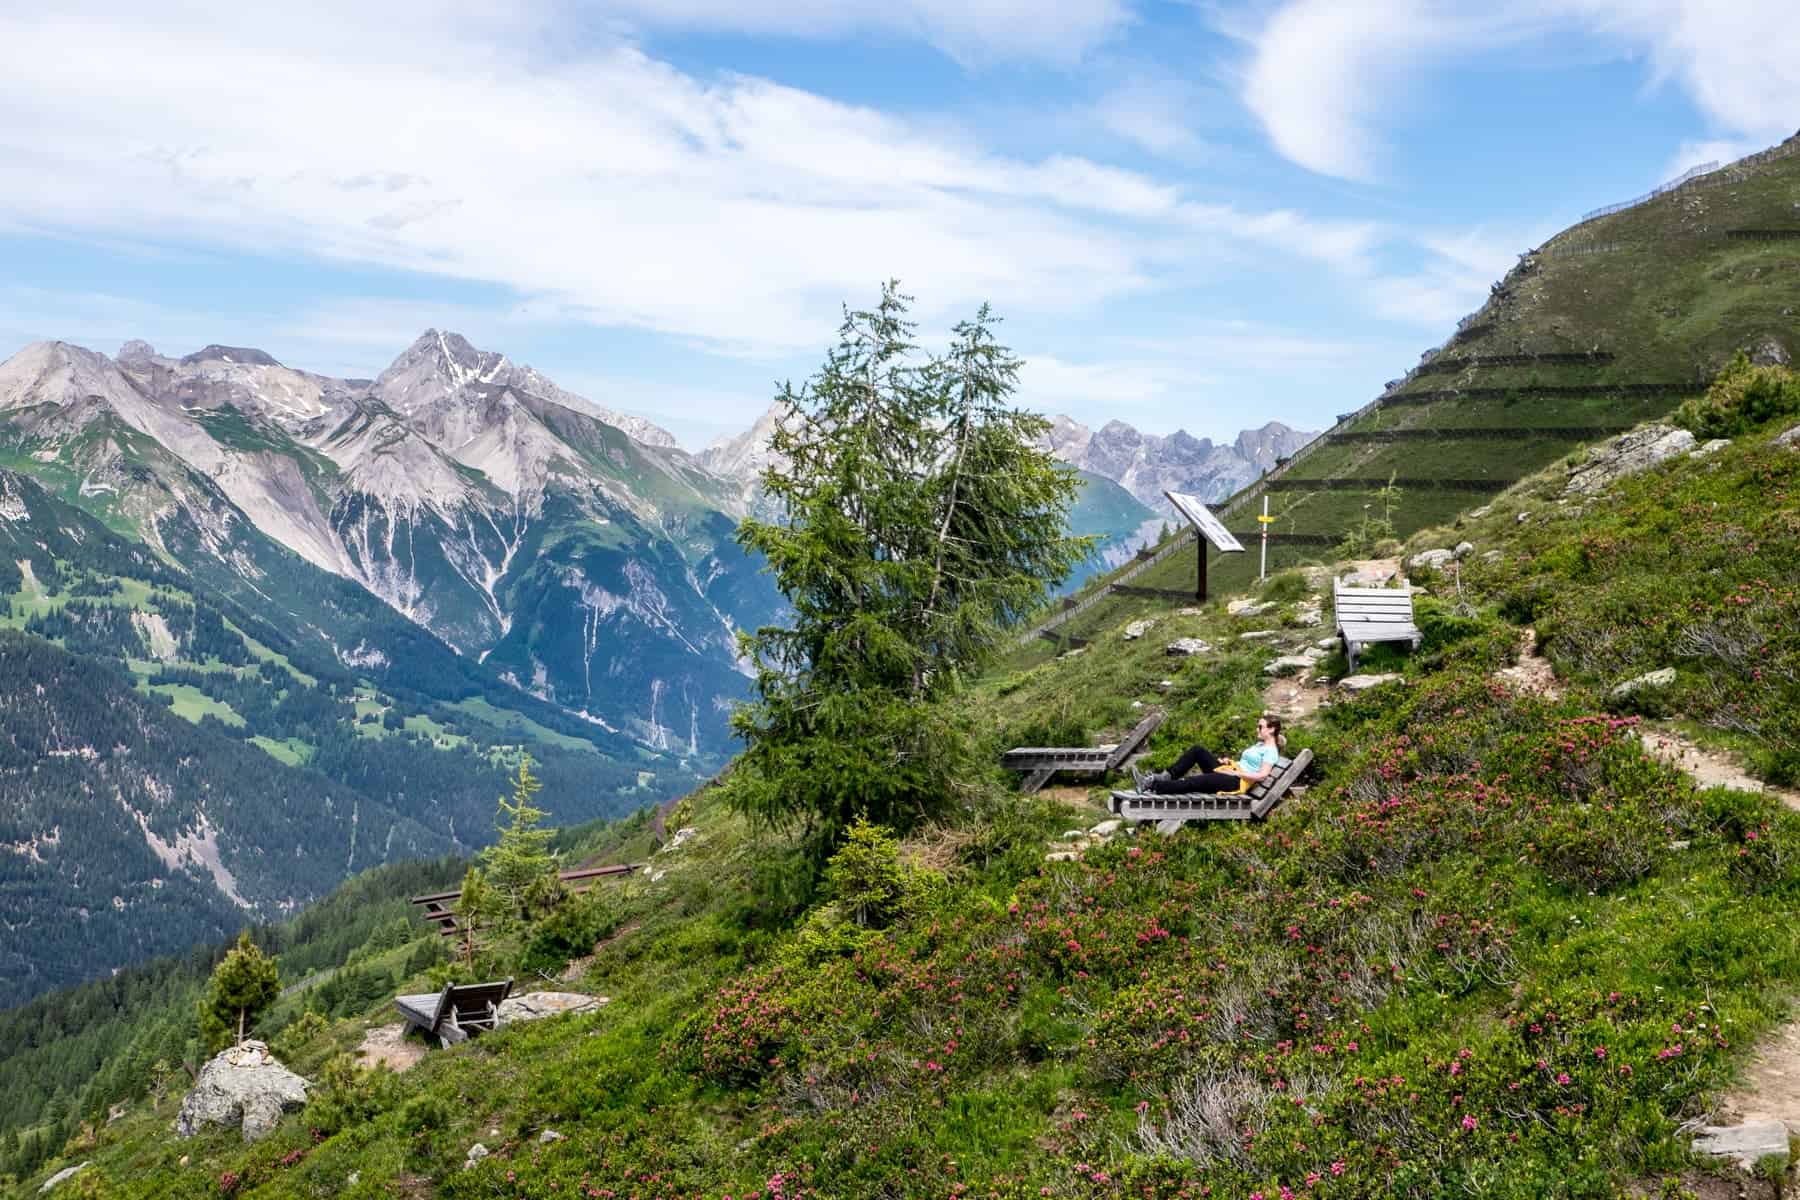 A woman rests on a wooden chair on a mountain slope, surrounded by flowers, on the St.Anton Alpenrosenweg hike